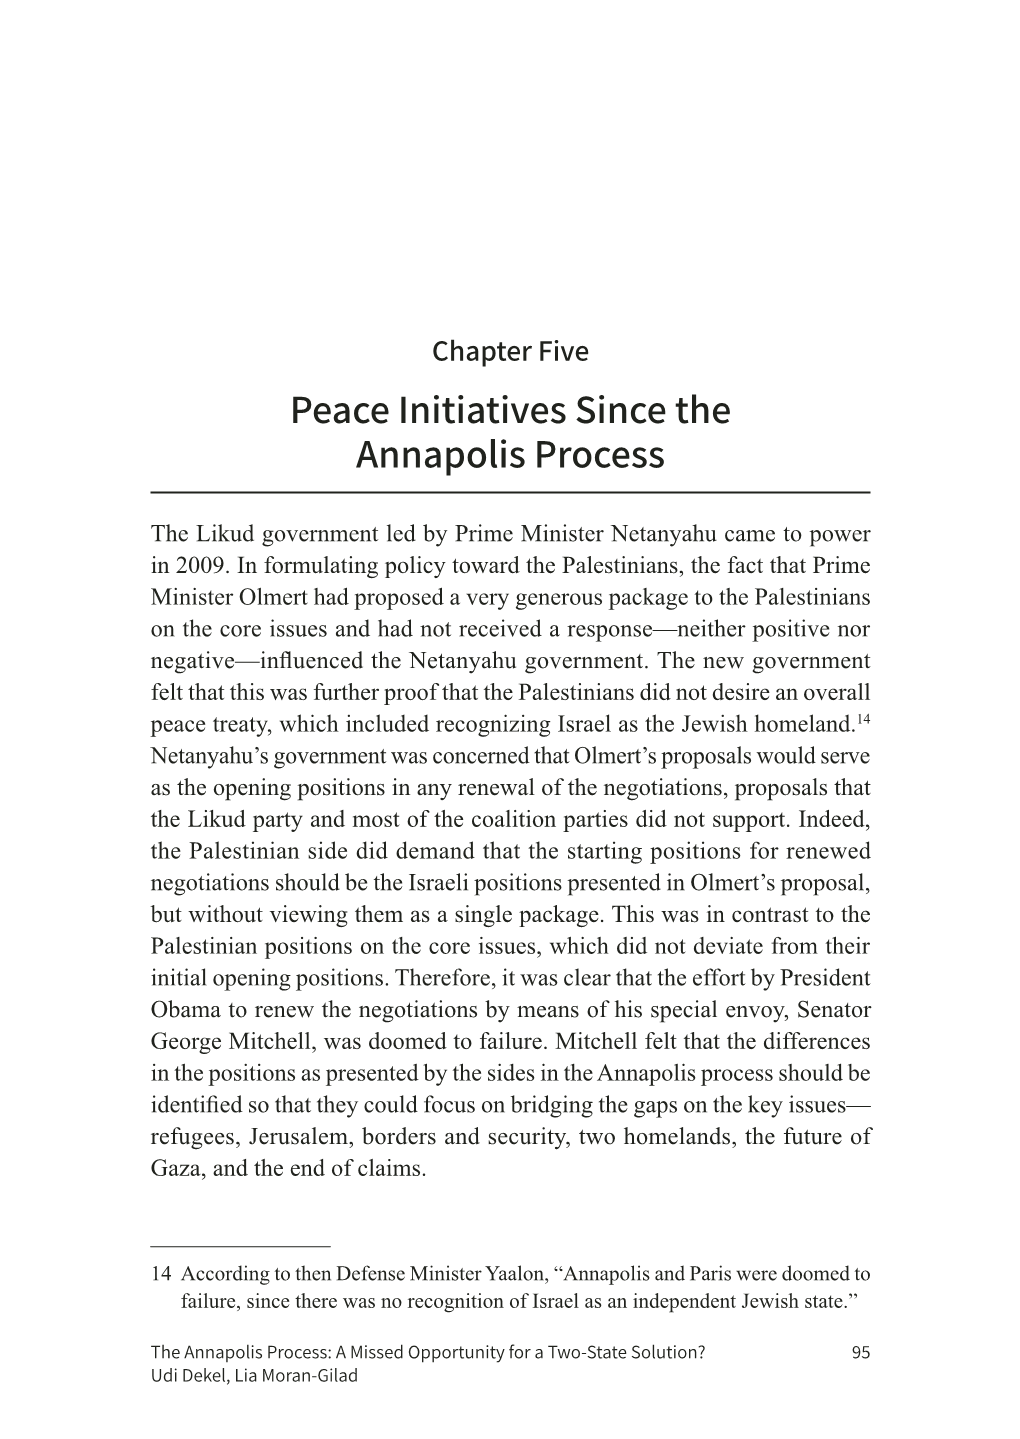 Peace Initiatives Since the Annapolis Process